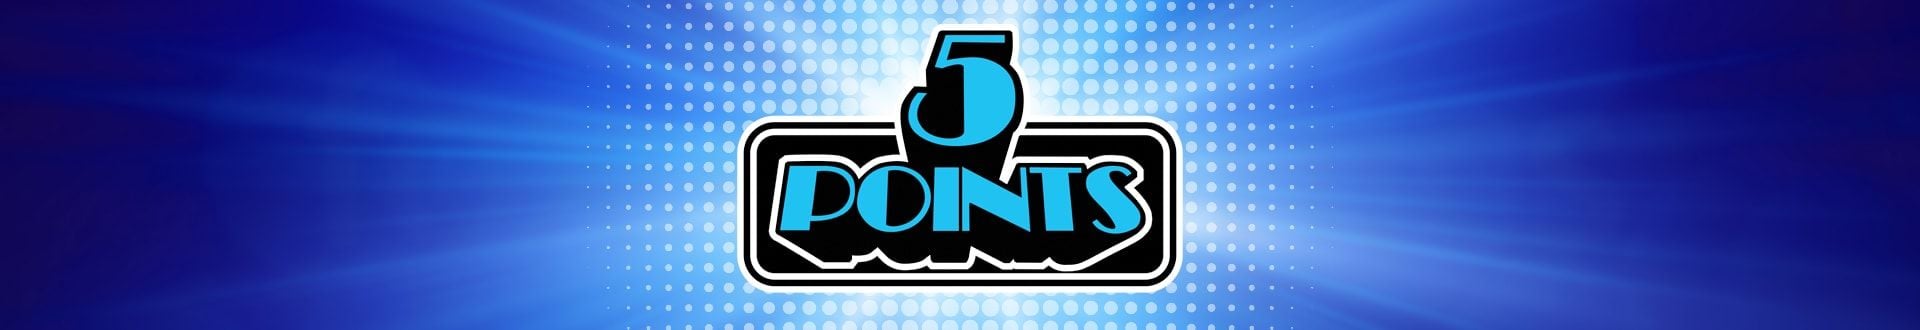 5 Points